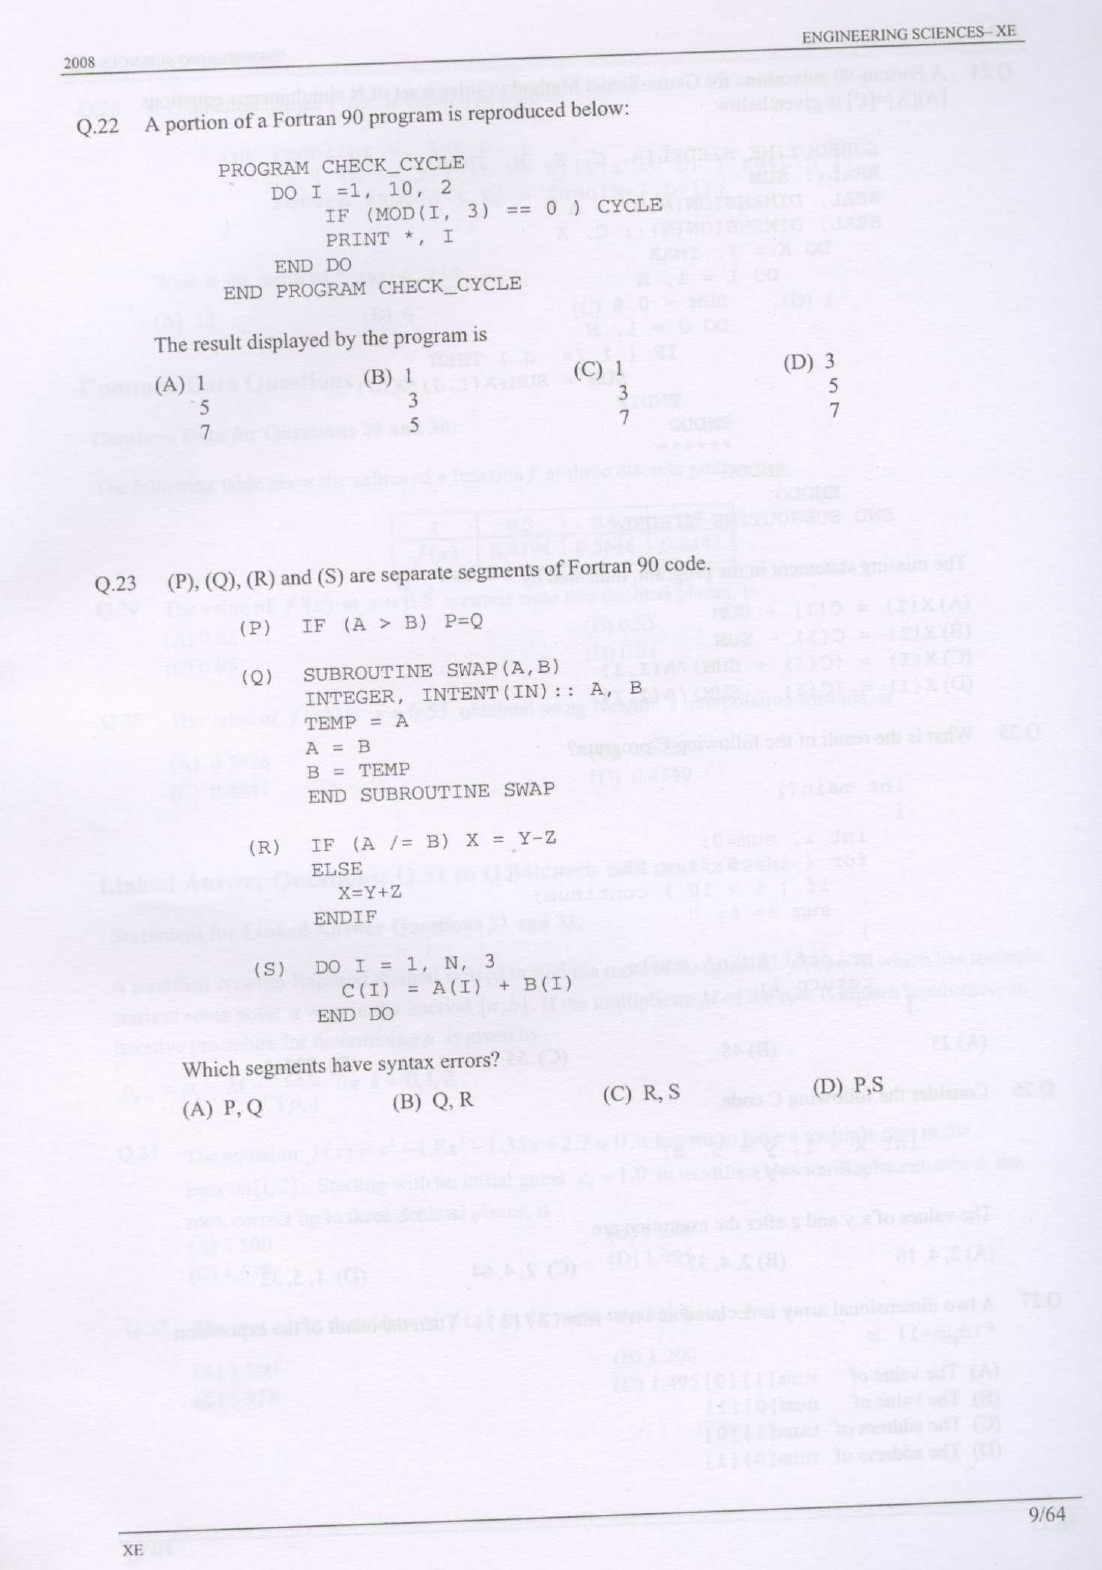 GATE Exam Question Paper 2008 Engineering Sciences 9